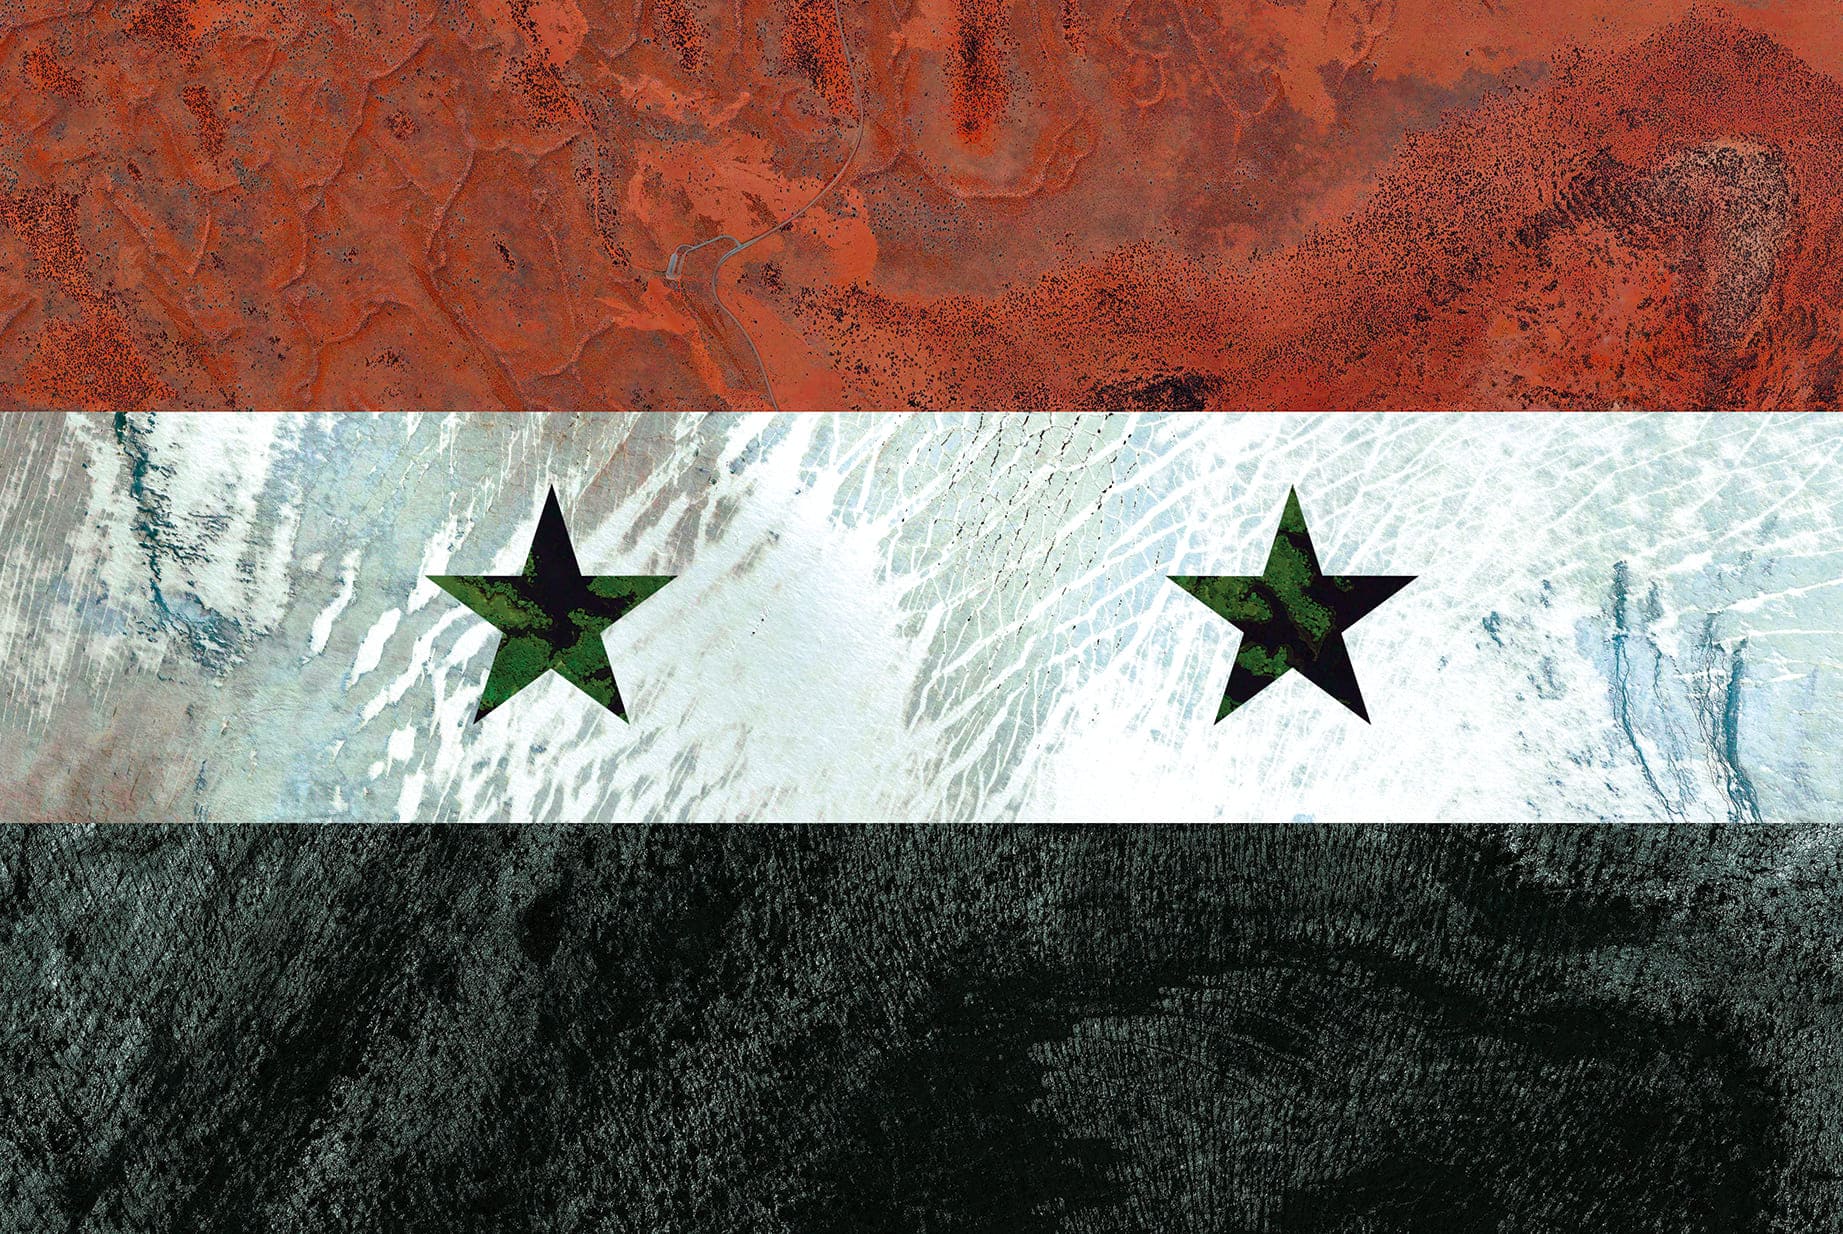 SIRYA EARTH FLAG, 2016, DIGITAL COLLAGE OF SATELLITE PHOTOGRAPHY FROM AUSTRALIA, GREENLAND, BRAZIL, ICELAND, diasec print CM 67×100, limited edition 9